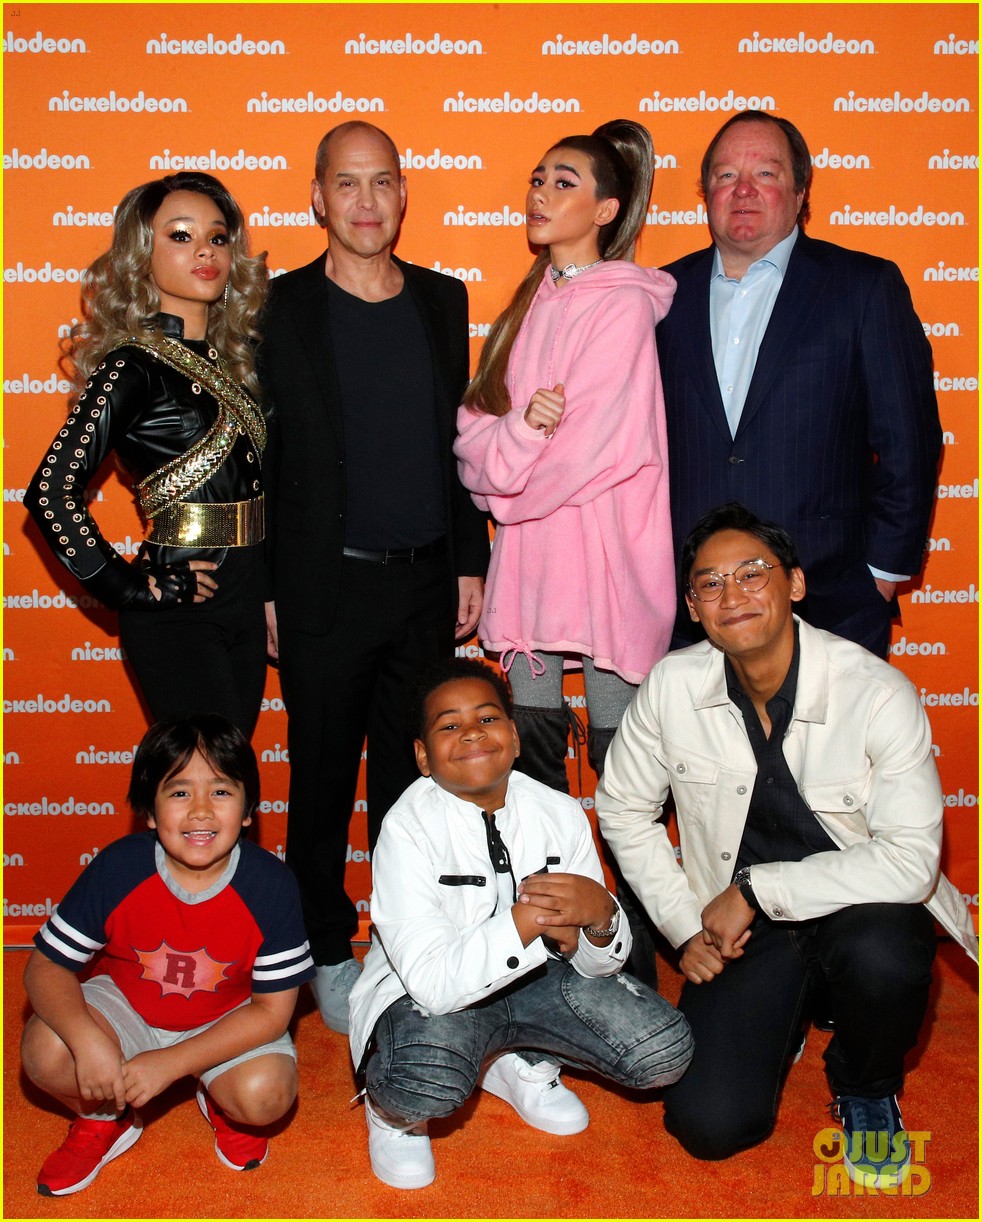 nathan janak gabrielle green dress up as ariana grande beyonce for nickelodeon event 01